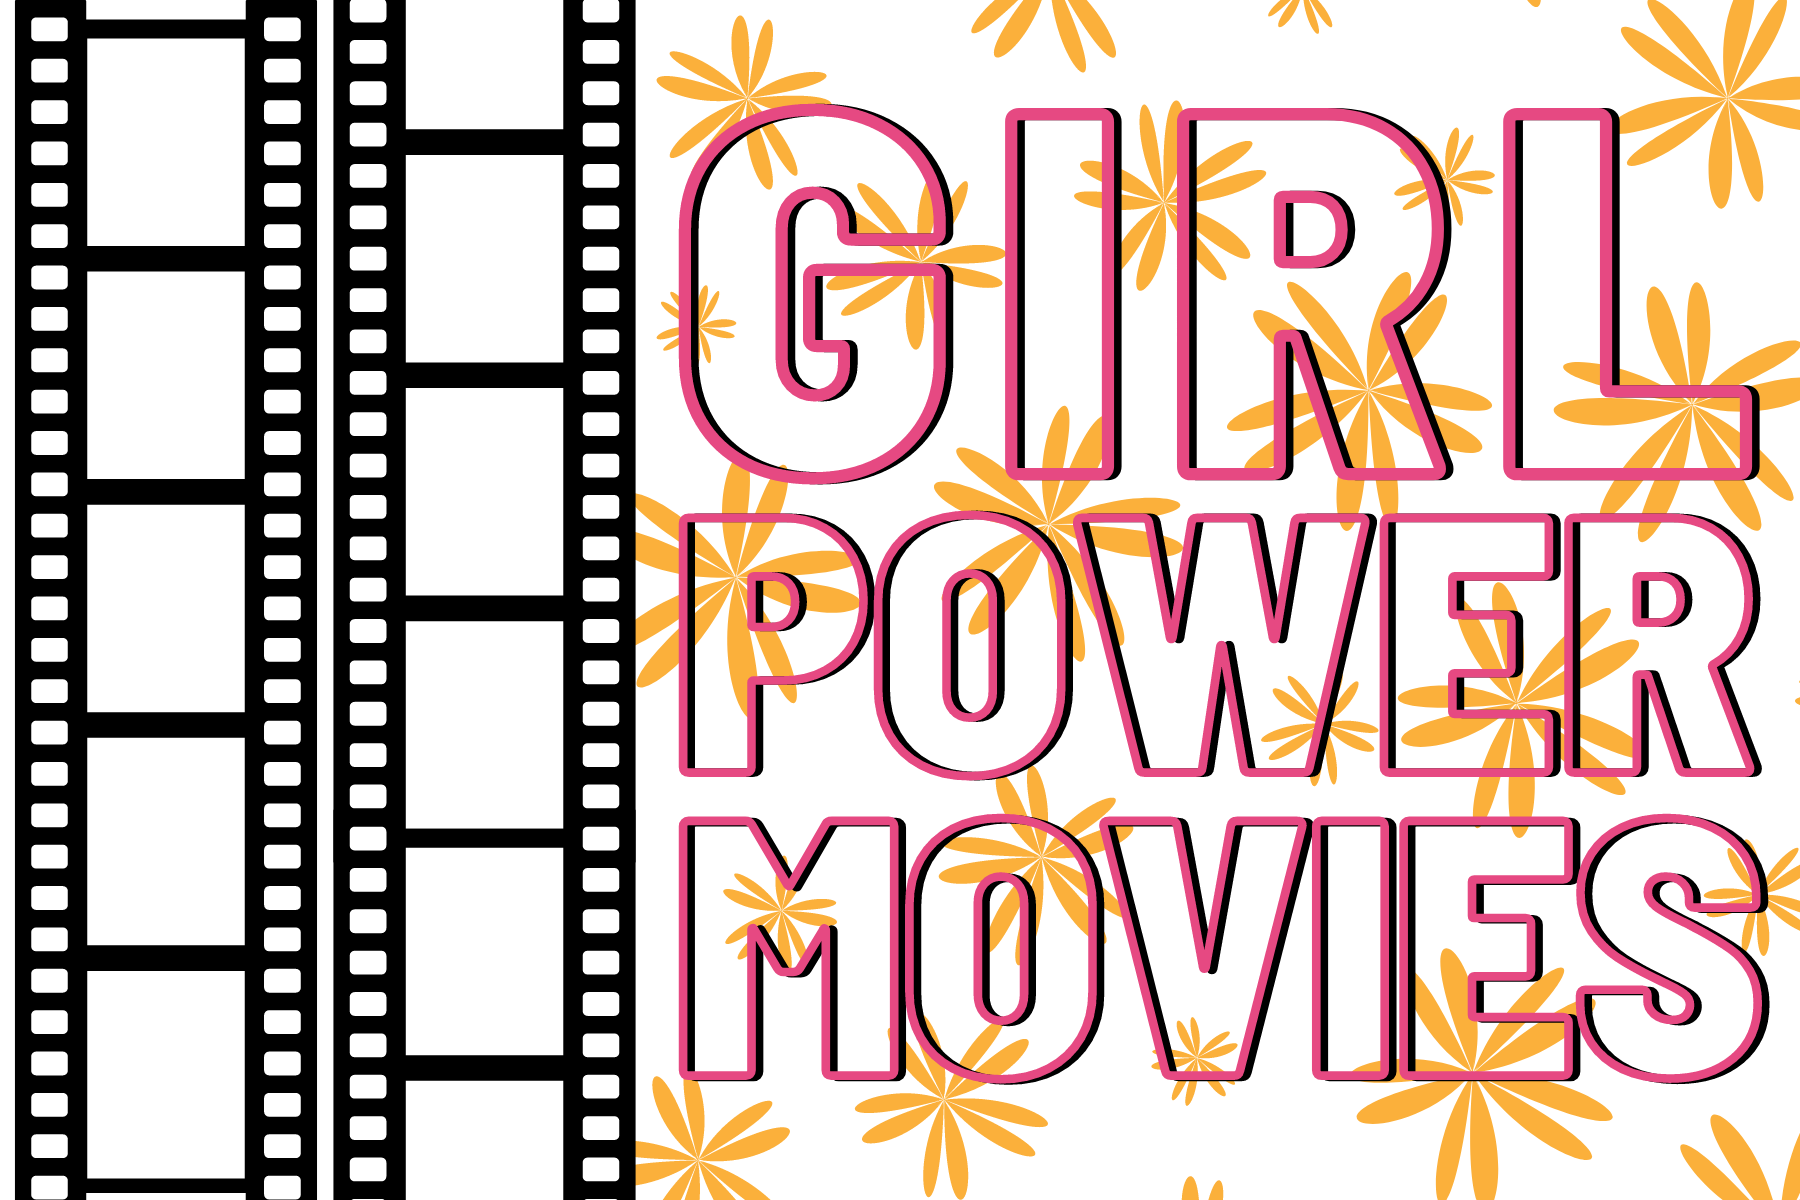 Girl Power Movie Recommendations